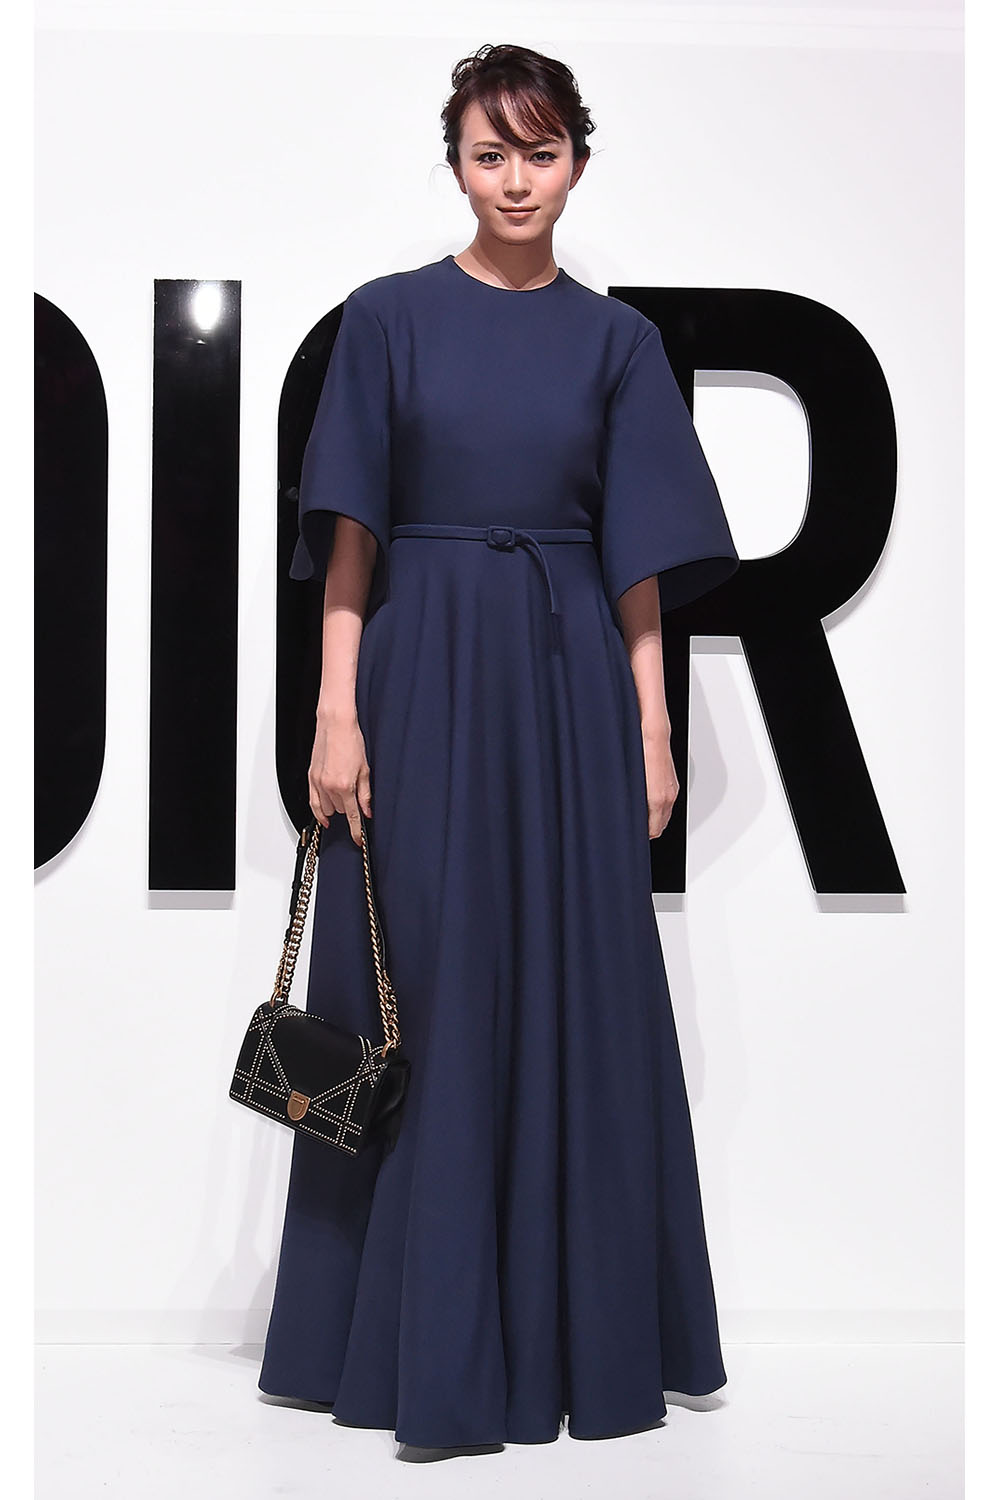 Actress Manami Higa attends the Dior For Love photocall in Tokyo wearing head-to-toe Christian Dior.